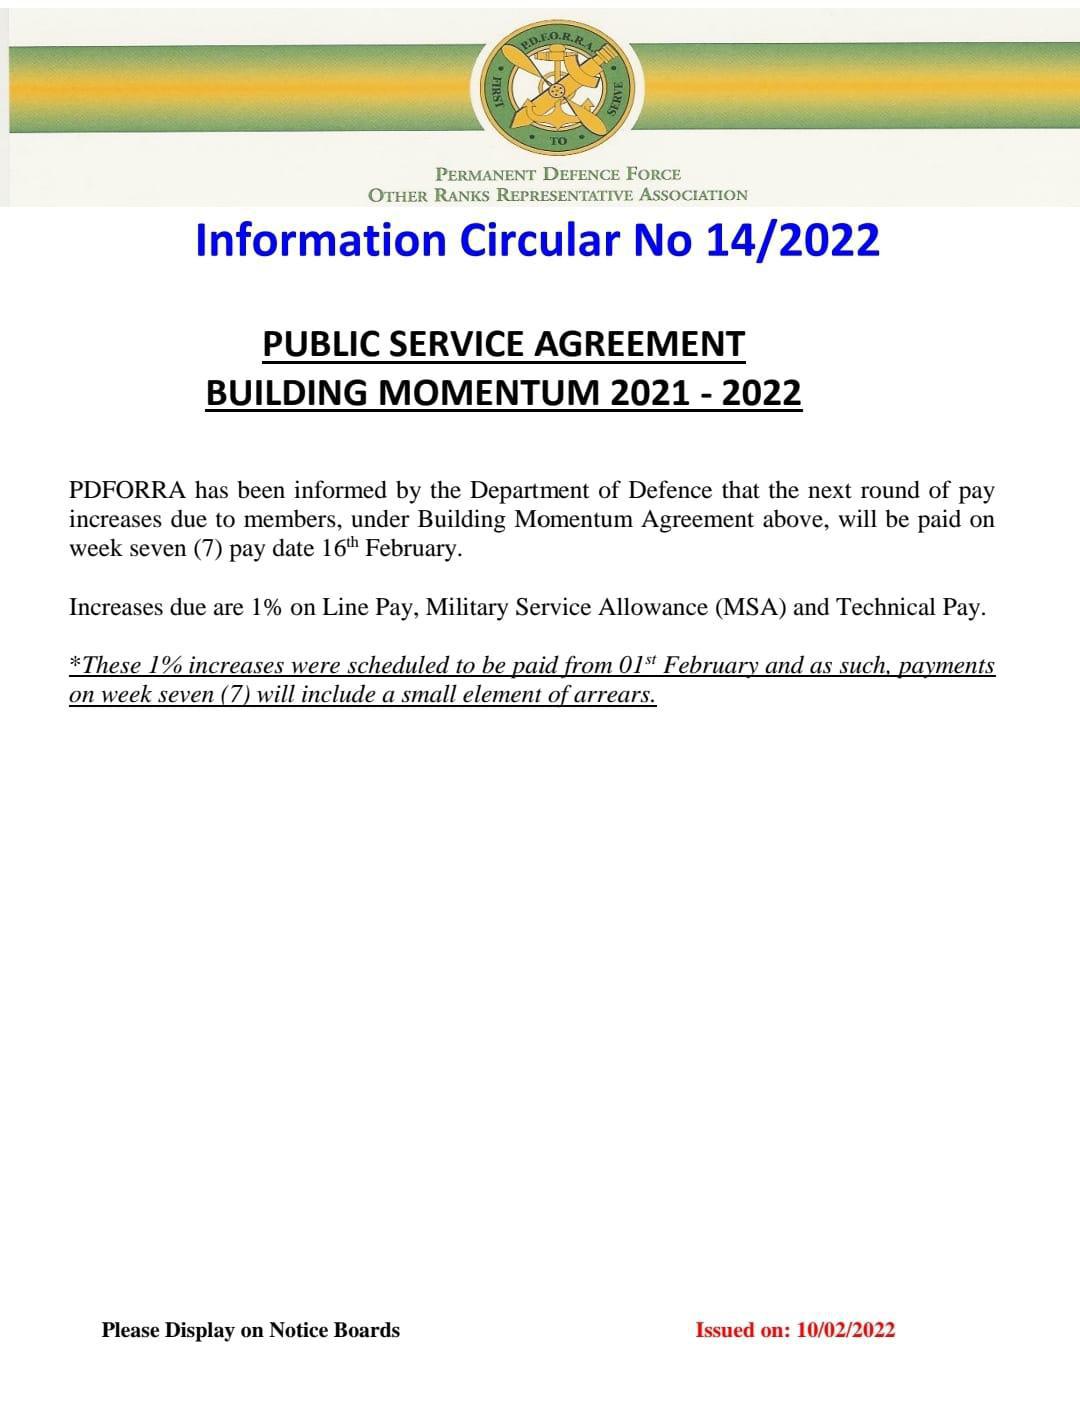 Information Circular No 14 of 22 - Public Service Agreement Building Momentum 2021 to 2022